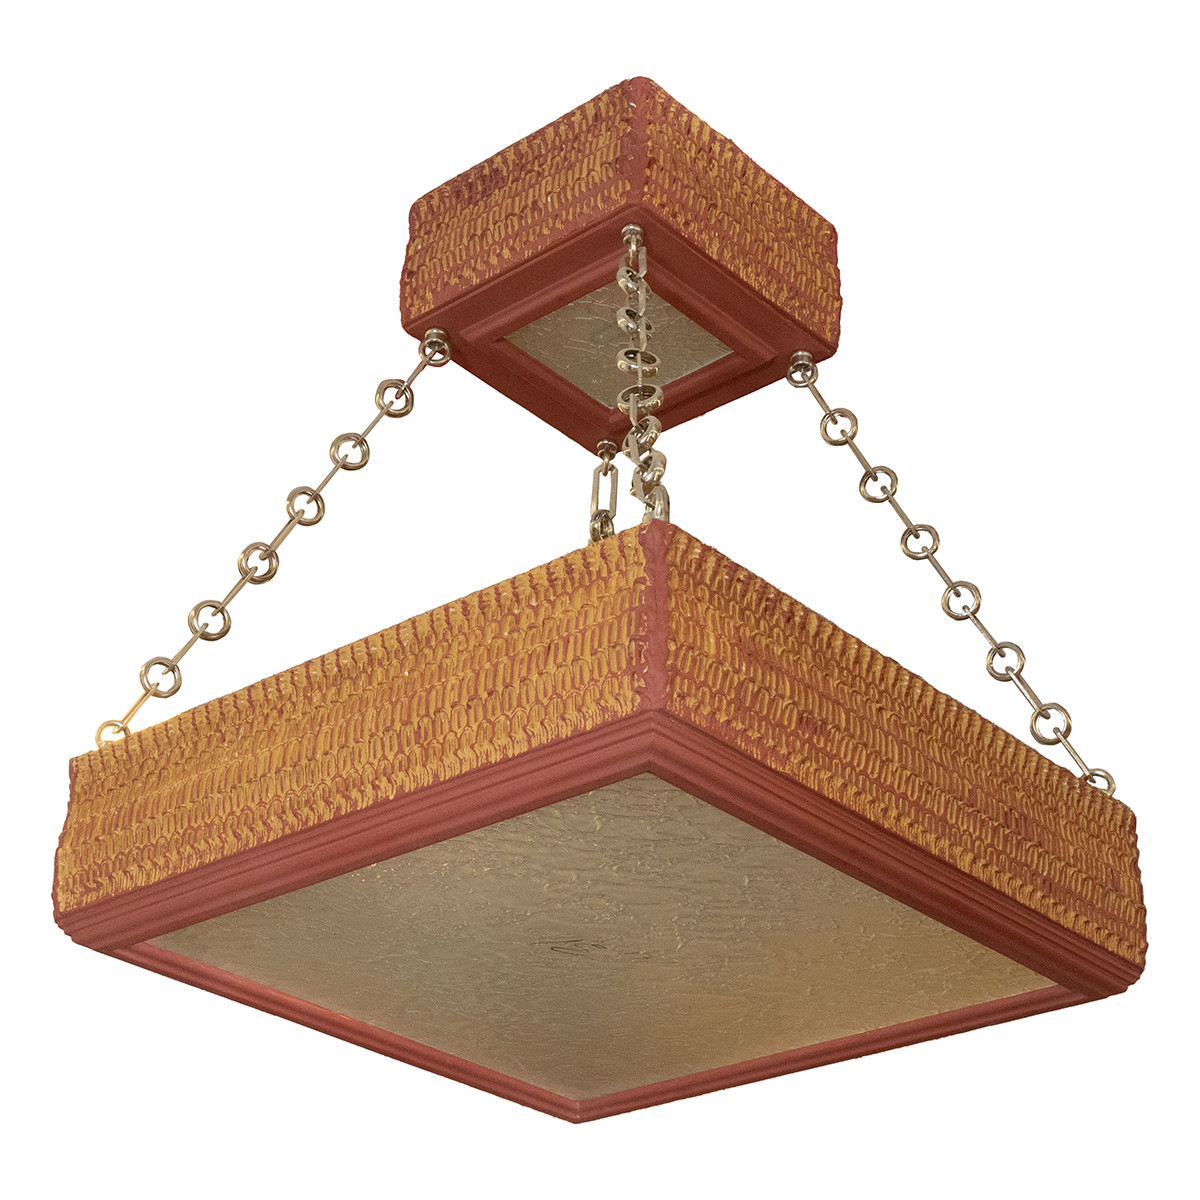 Two-tier square giltwood pendant by Carlos Villegas